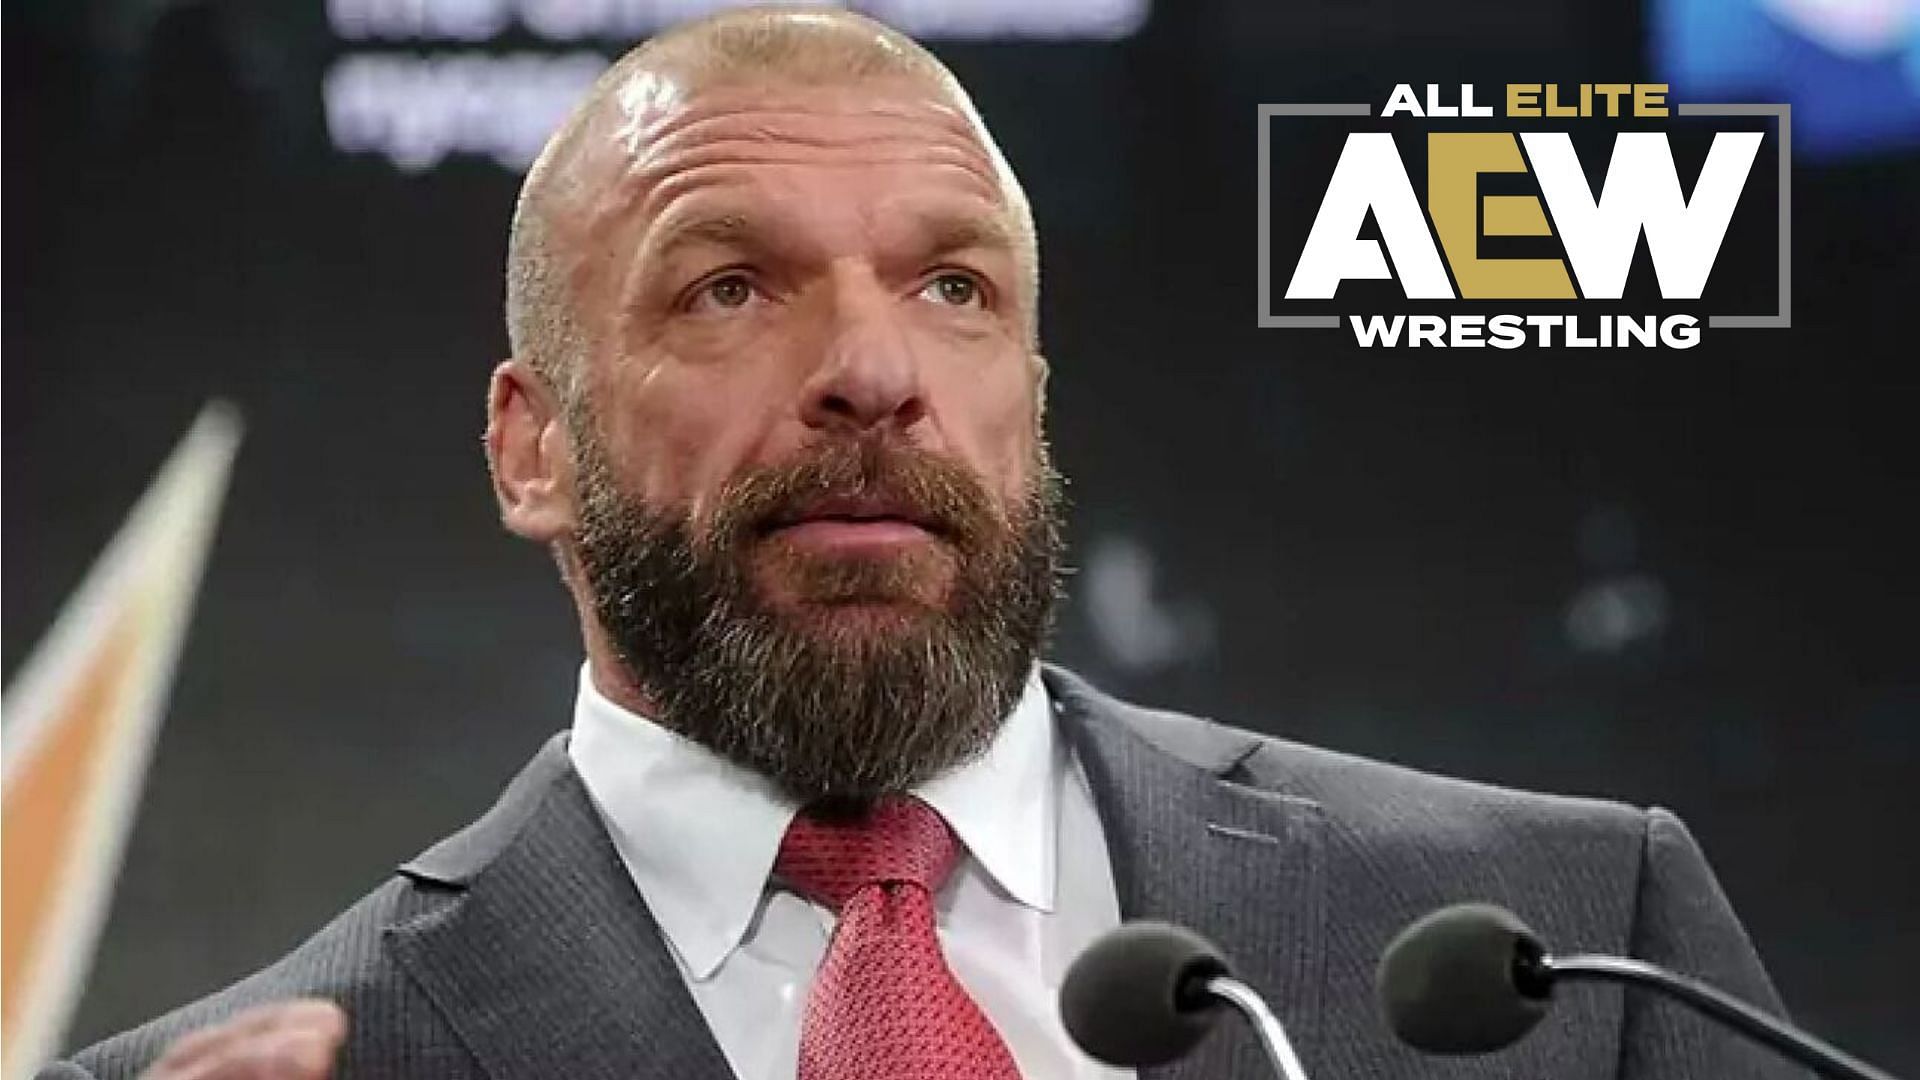 Triple H has been overseeing the creative direction of WWE since mid-2022